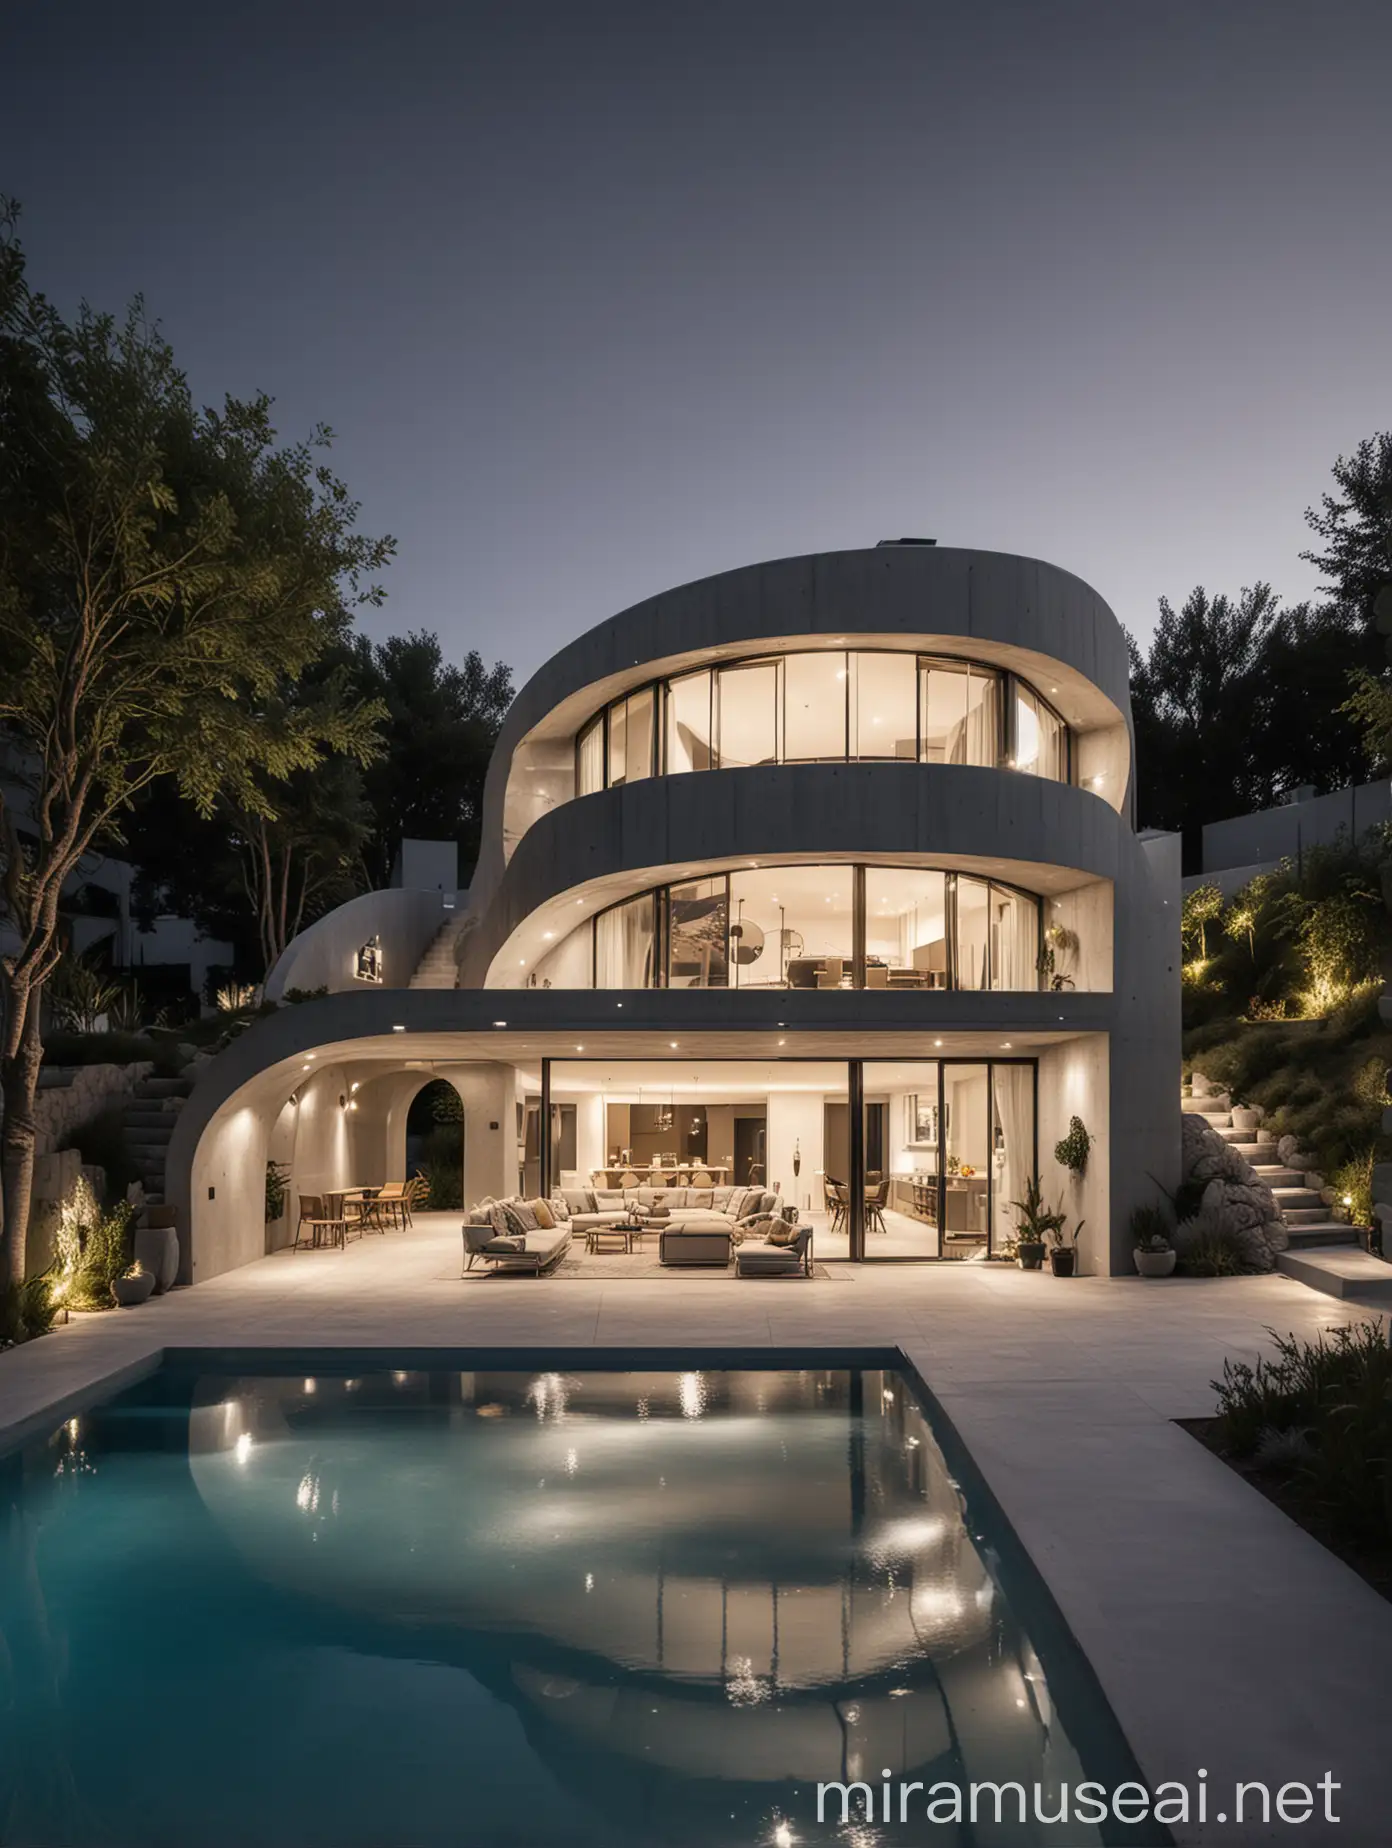 A modern, duplex gray concrete prefabricated house with a pool, semi-circular arched design, terrace, creative lighting, and innovative design approved by an architectural competition.